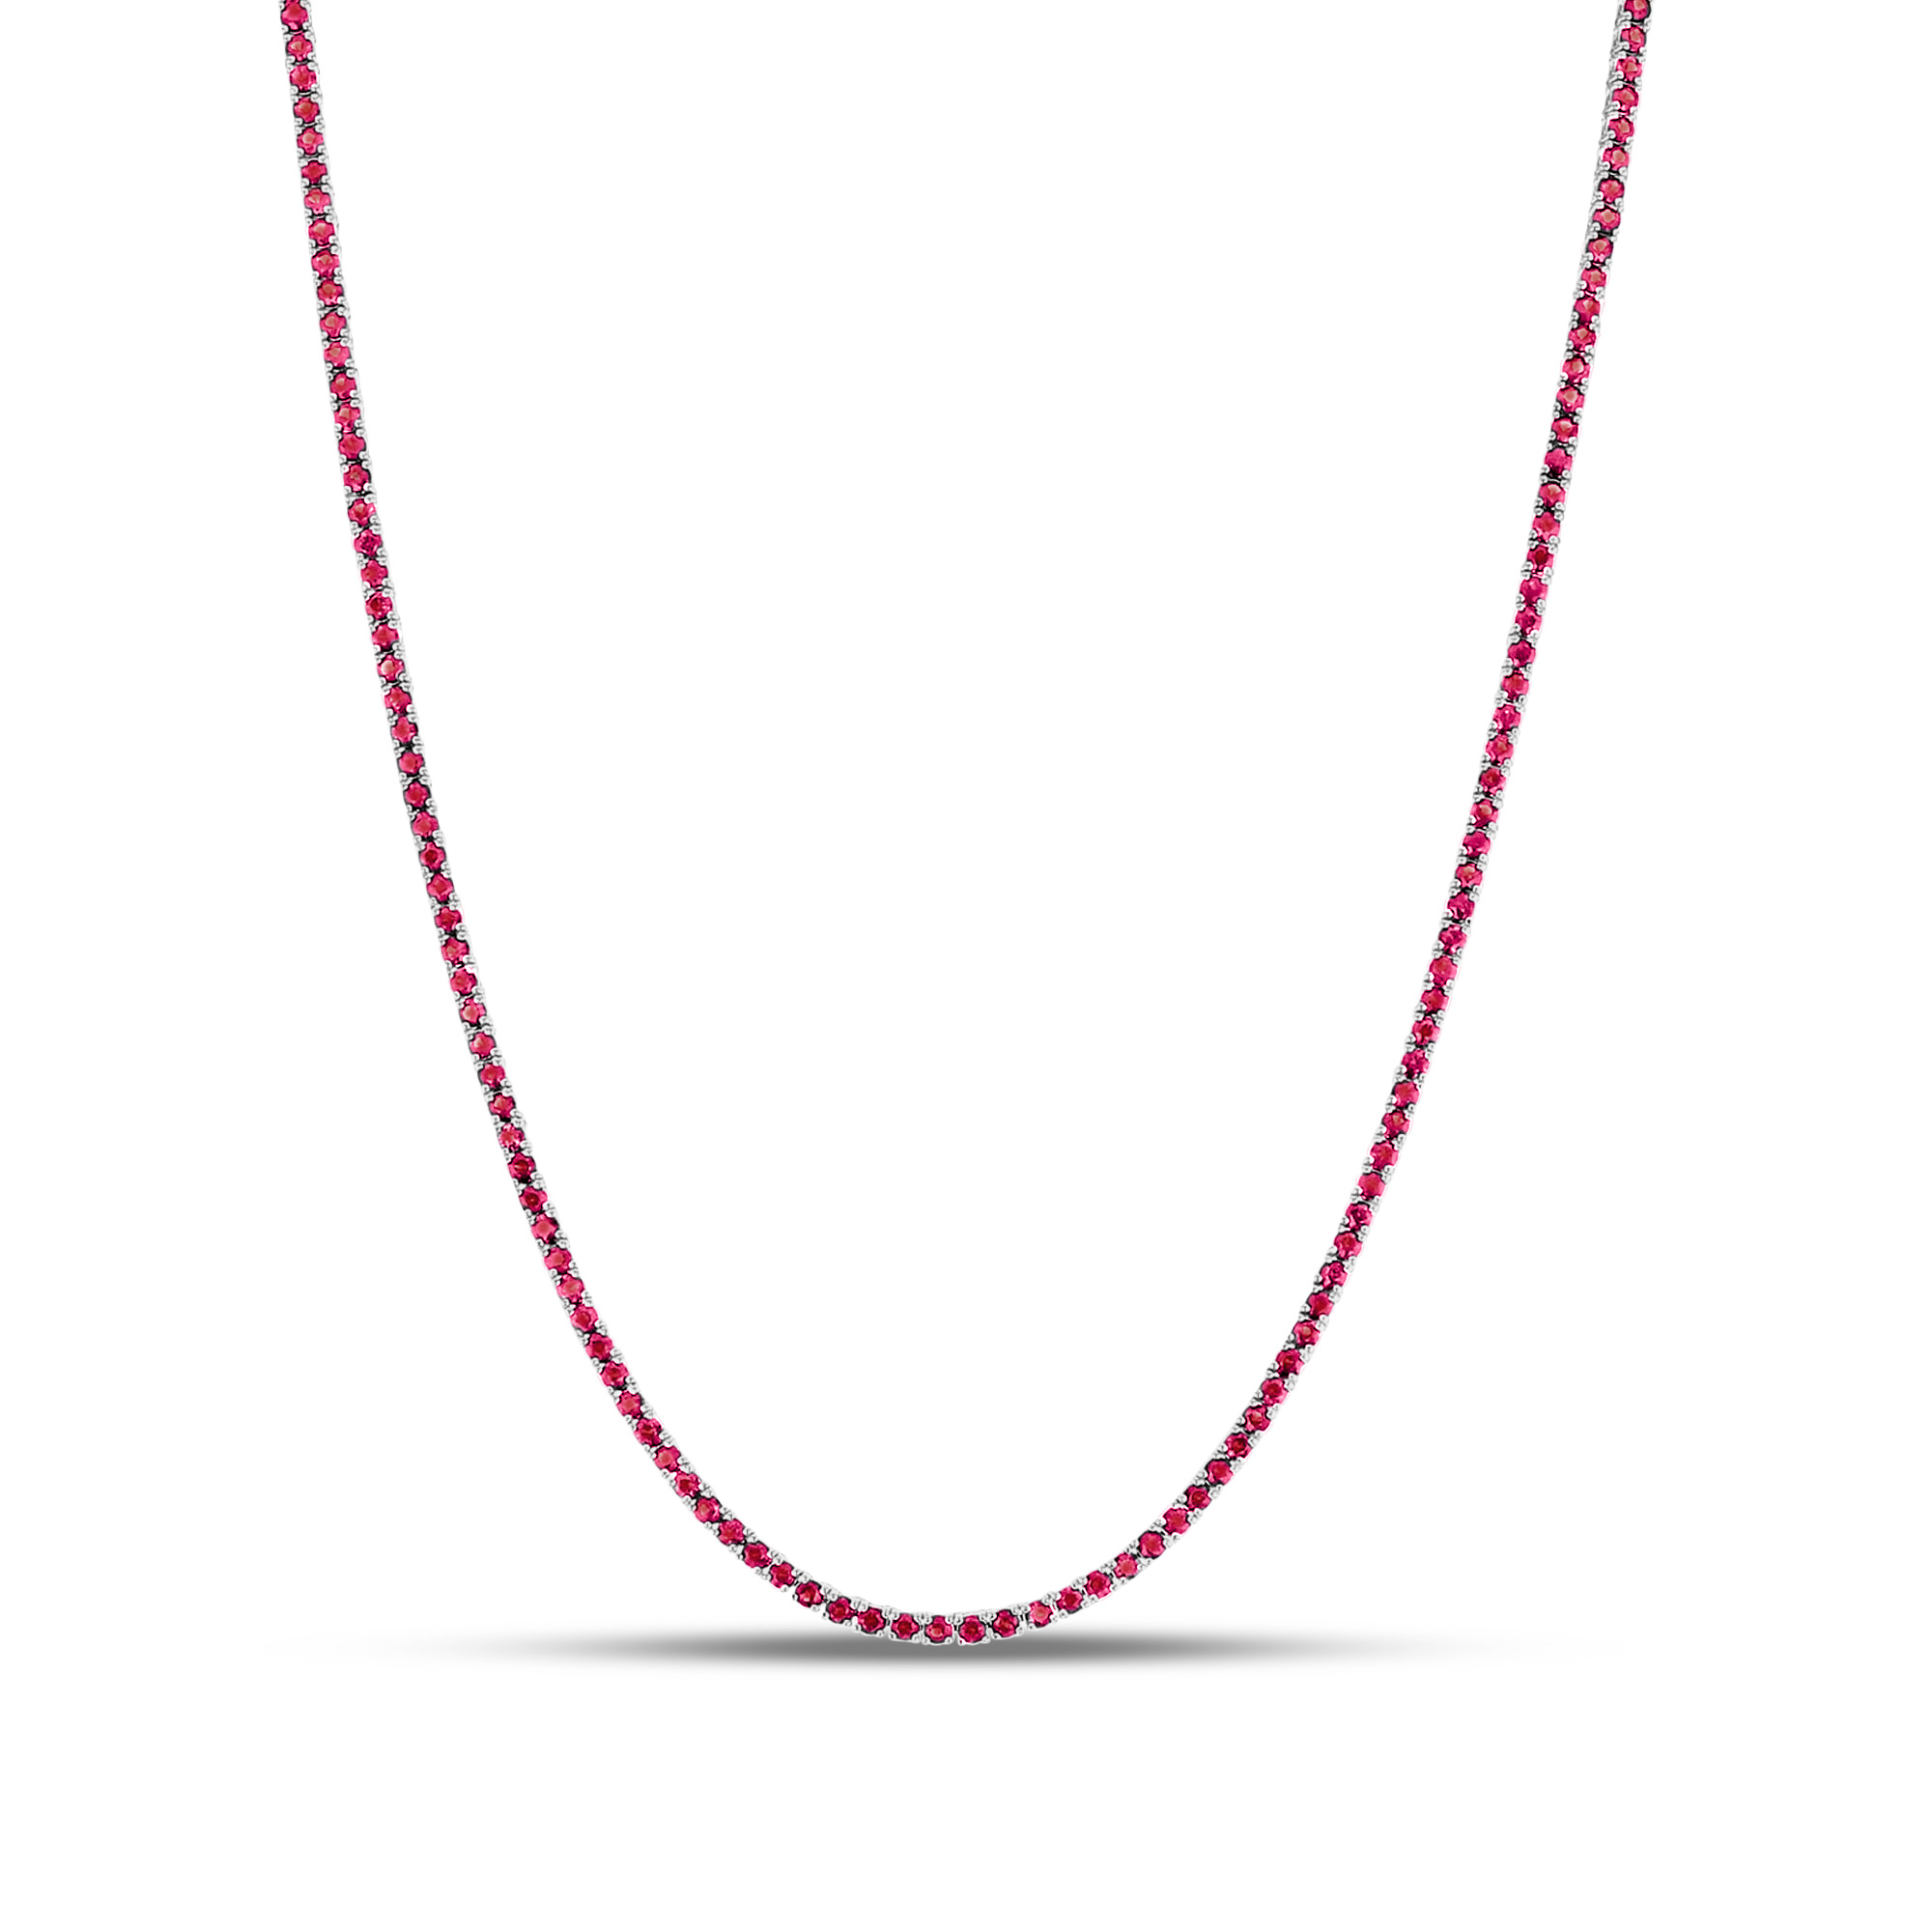 View 7.00ctw Ruby Tennis Necklace in 17 Inch in 14k White Gold